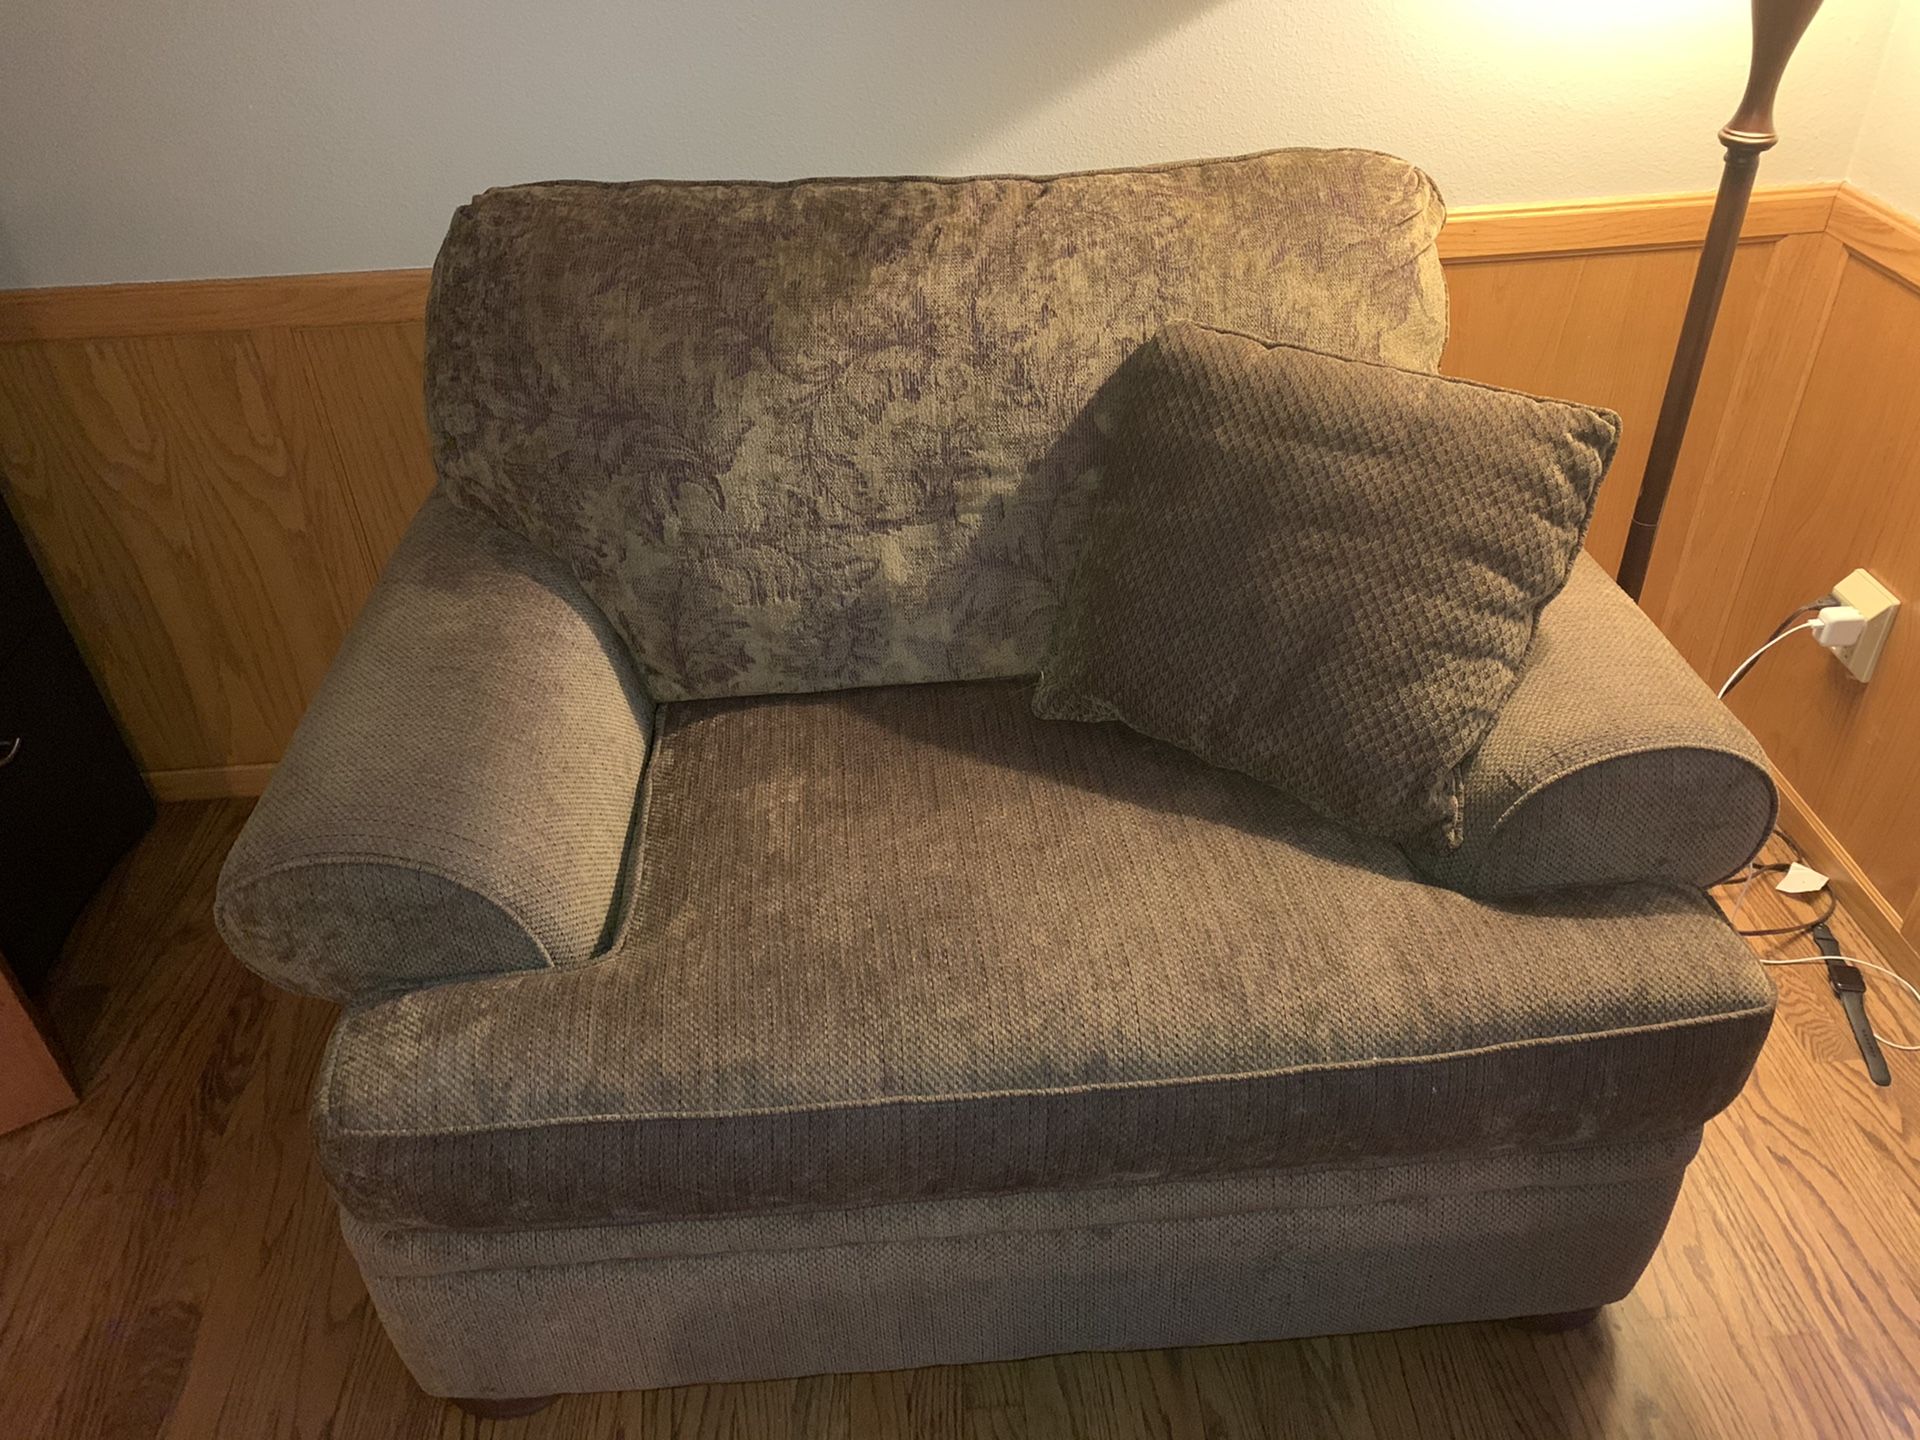 Brown oversized chair with matching ottoman